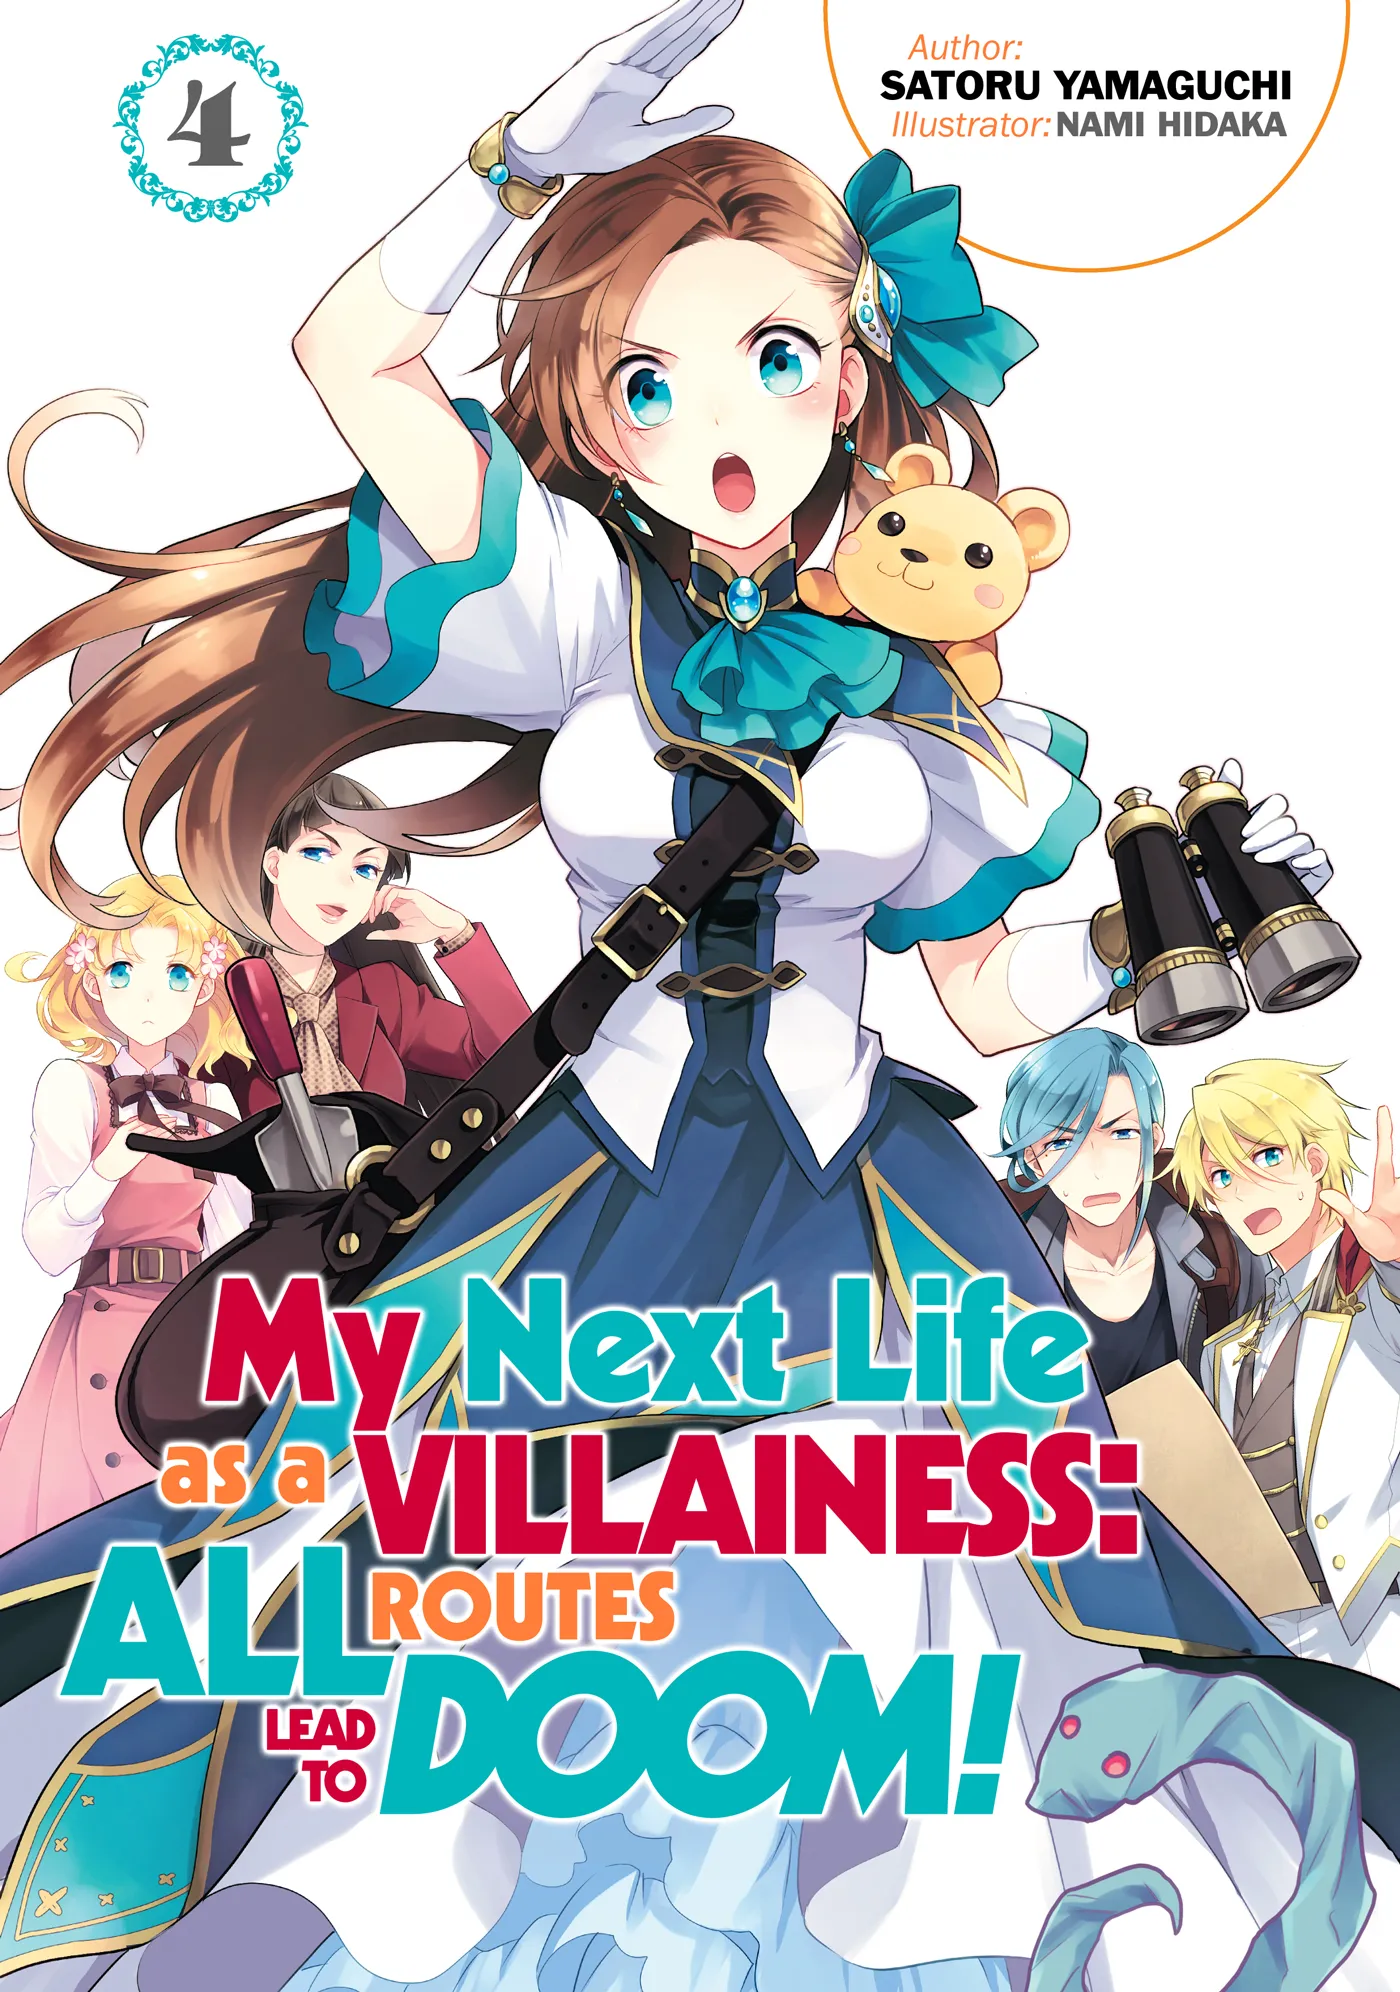 My Next Life as a Villainess: All Routes Lead to Doom! Volume 4 (My Next Life as a Villainess: All Routes Lead to Doom! #4)